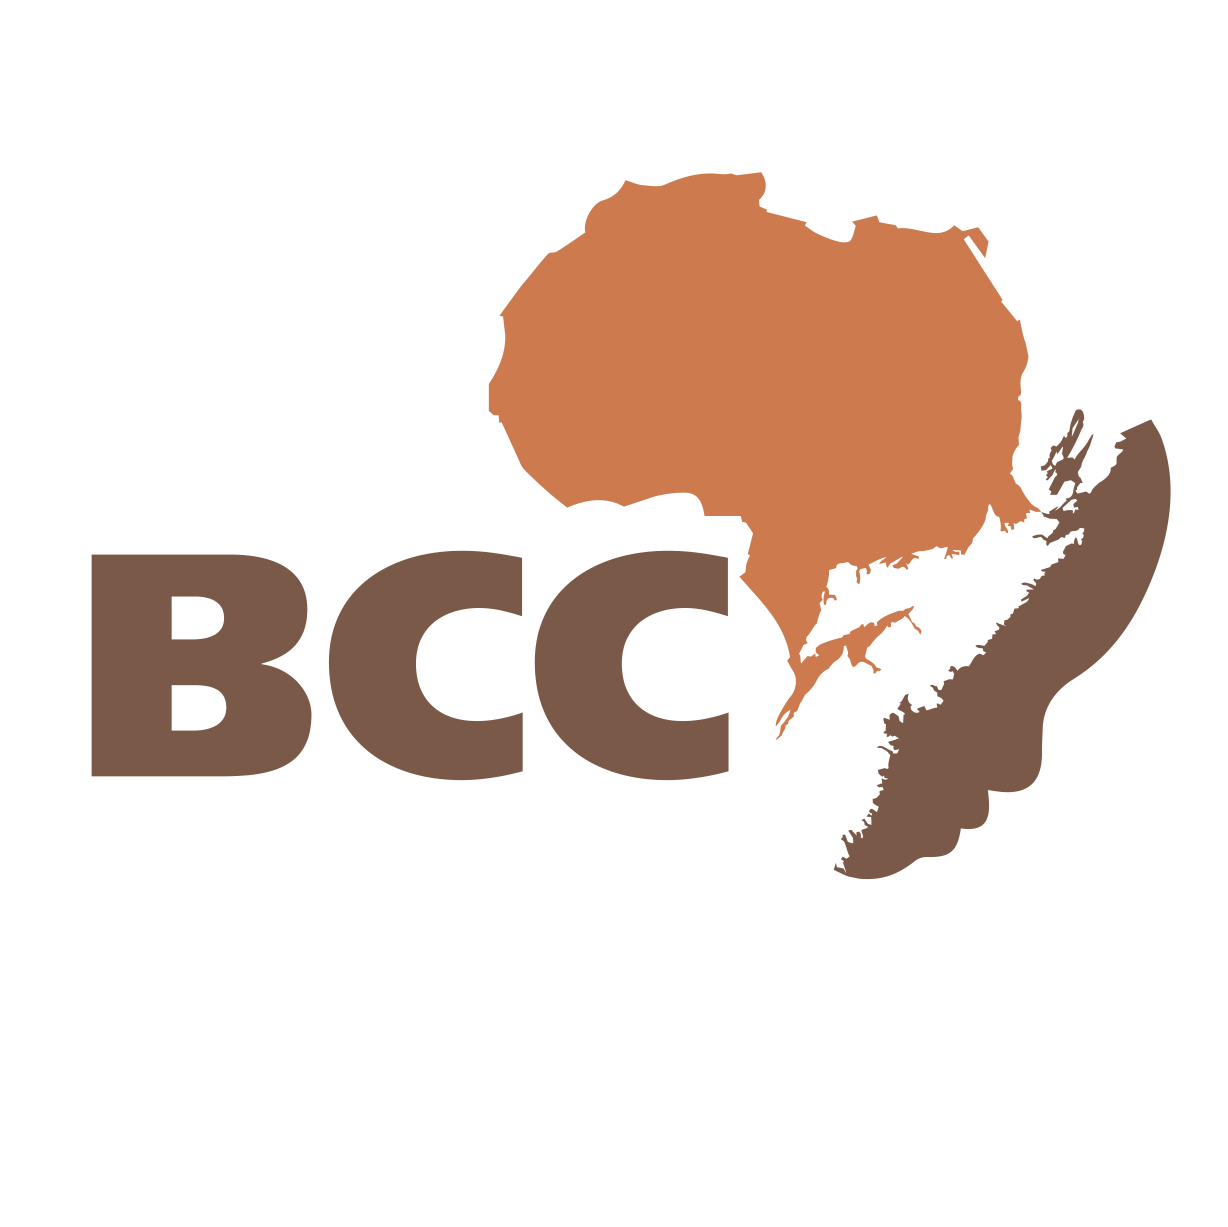 The Black Cultural Centre for Nova Scotia, established in 1983, as a museum to celebrate and inspire the history and culture of African Nova Scotians